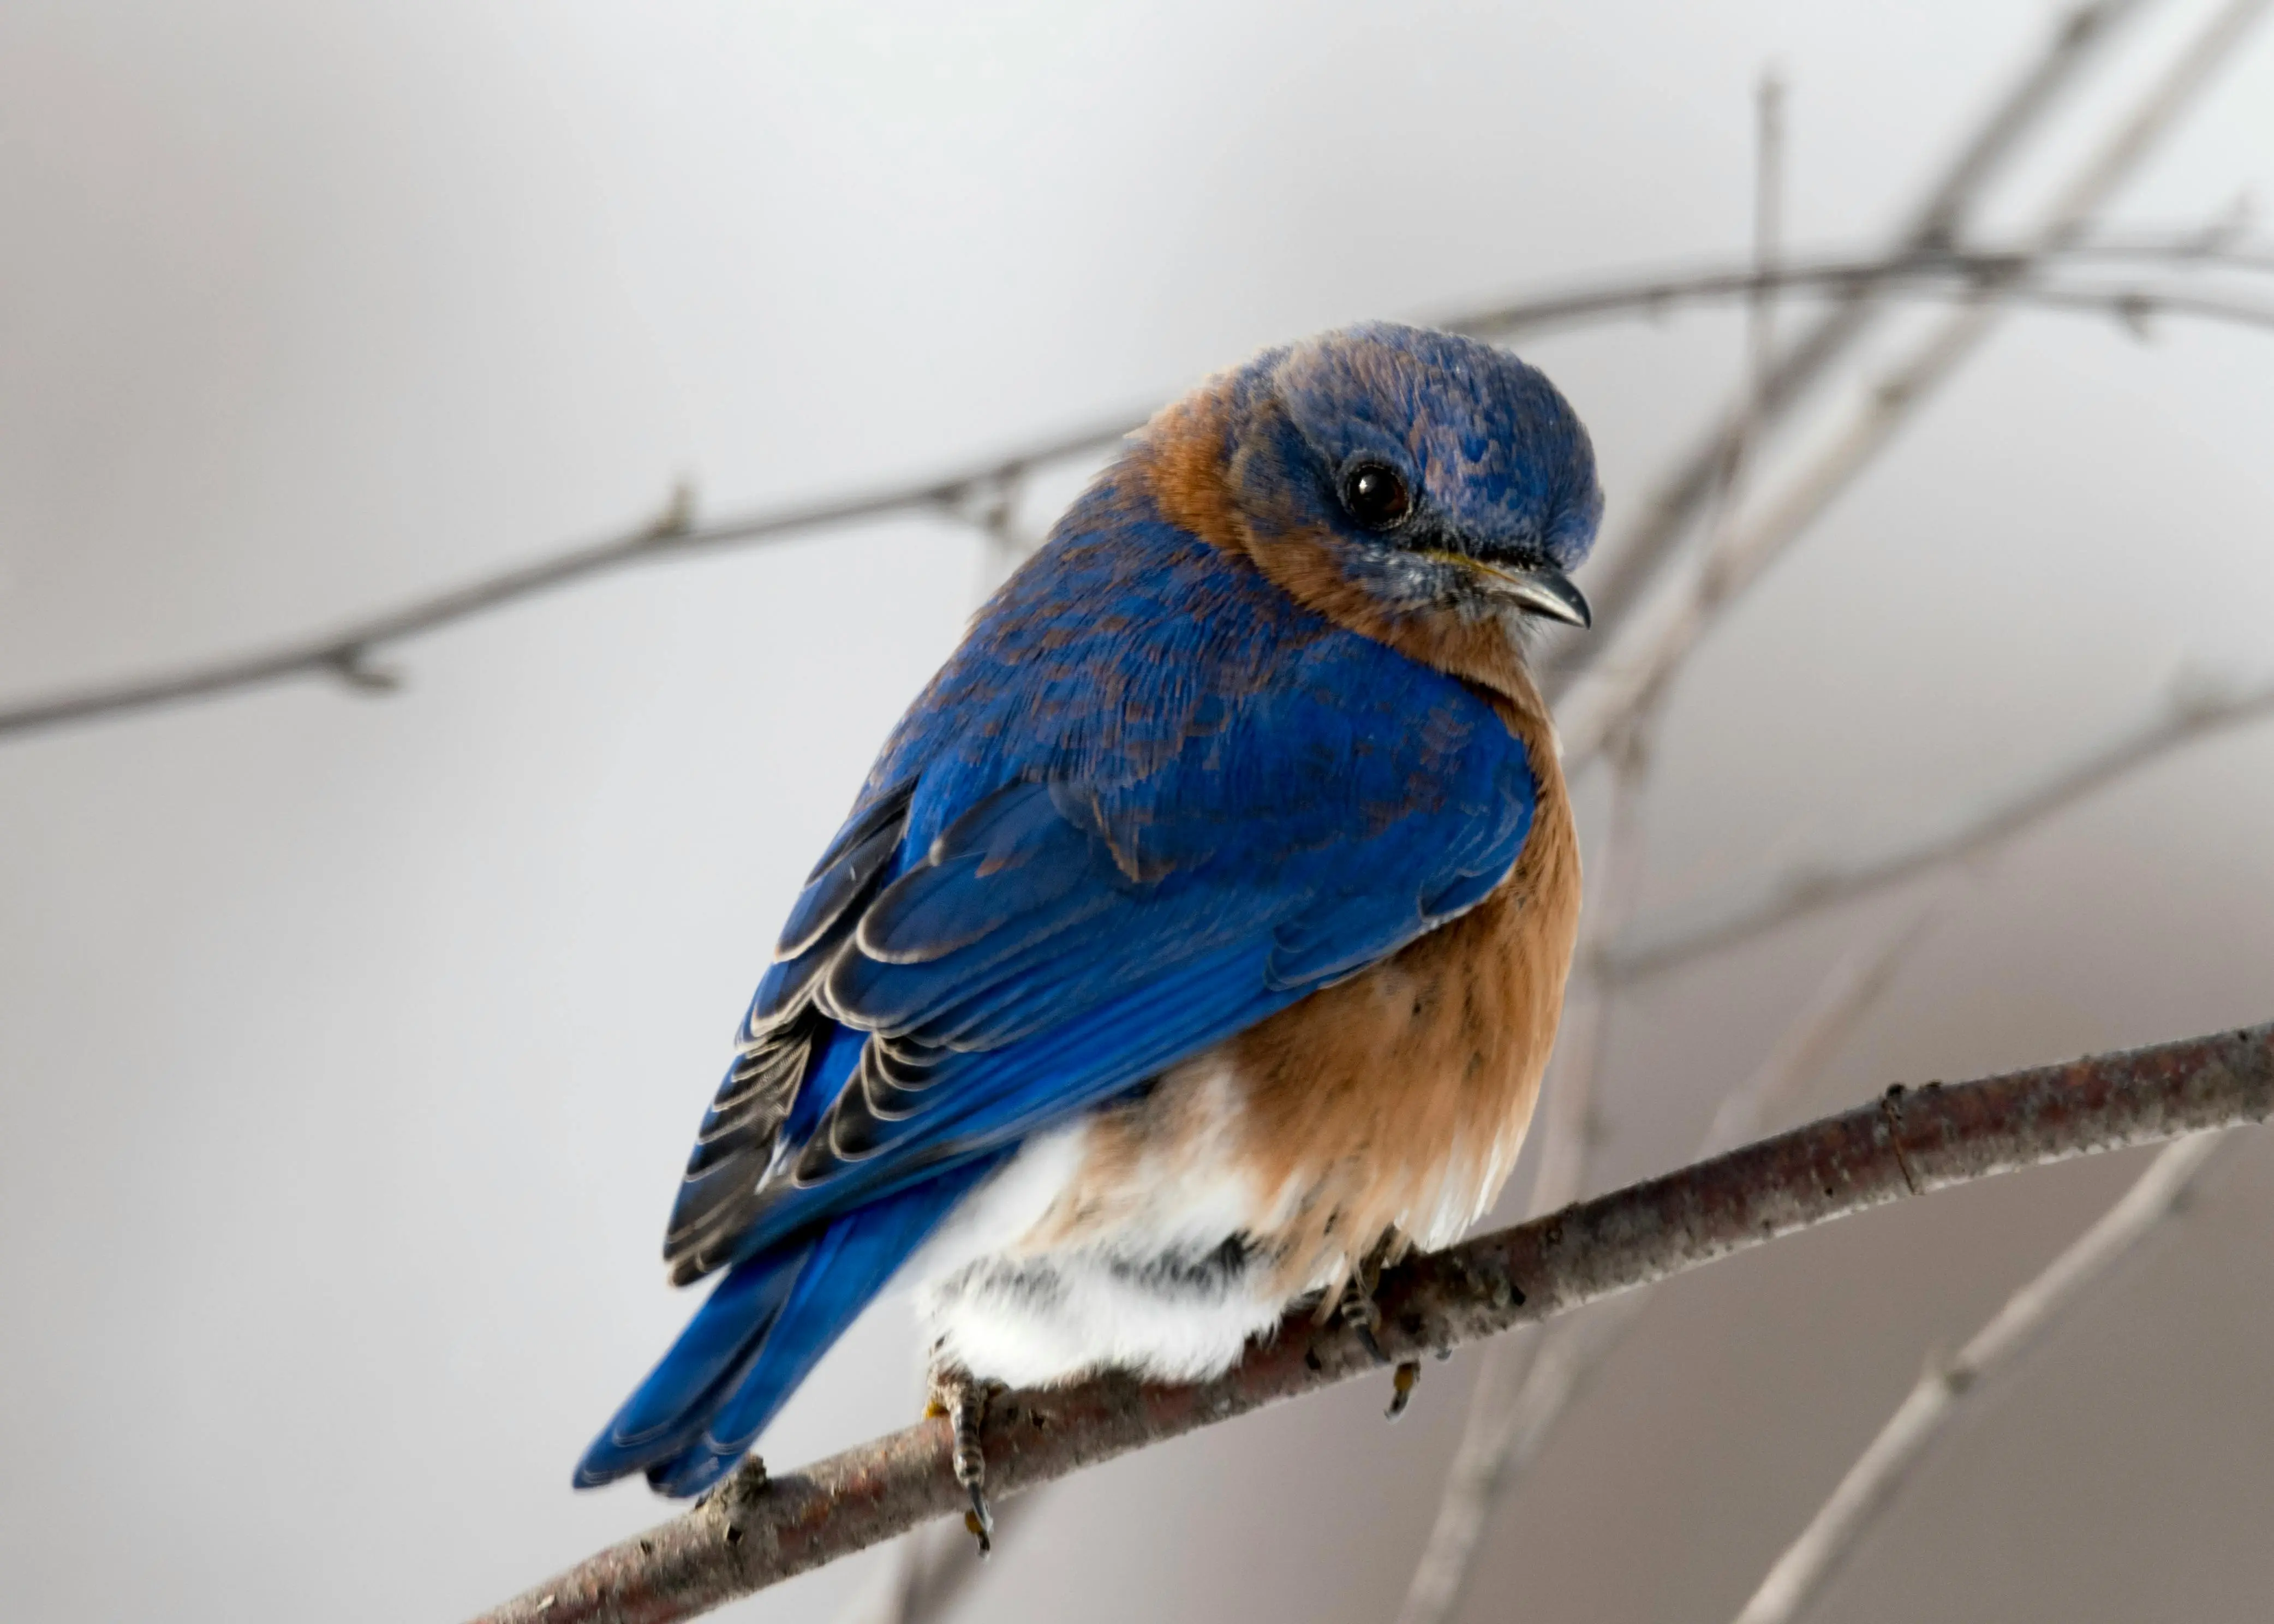 Amazon discounts platform  A Guide for Bird Enthusiasts: How to Identify Common Backyard Birds